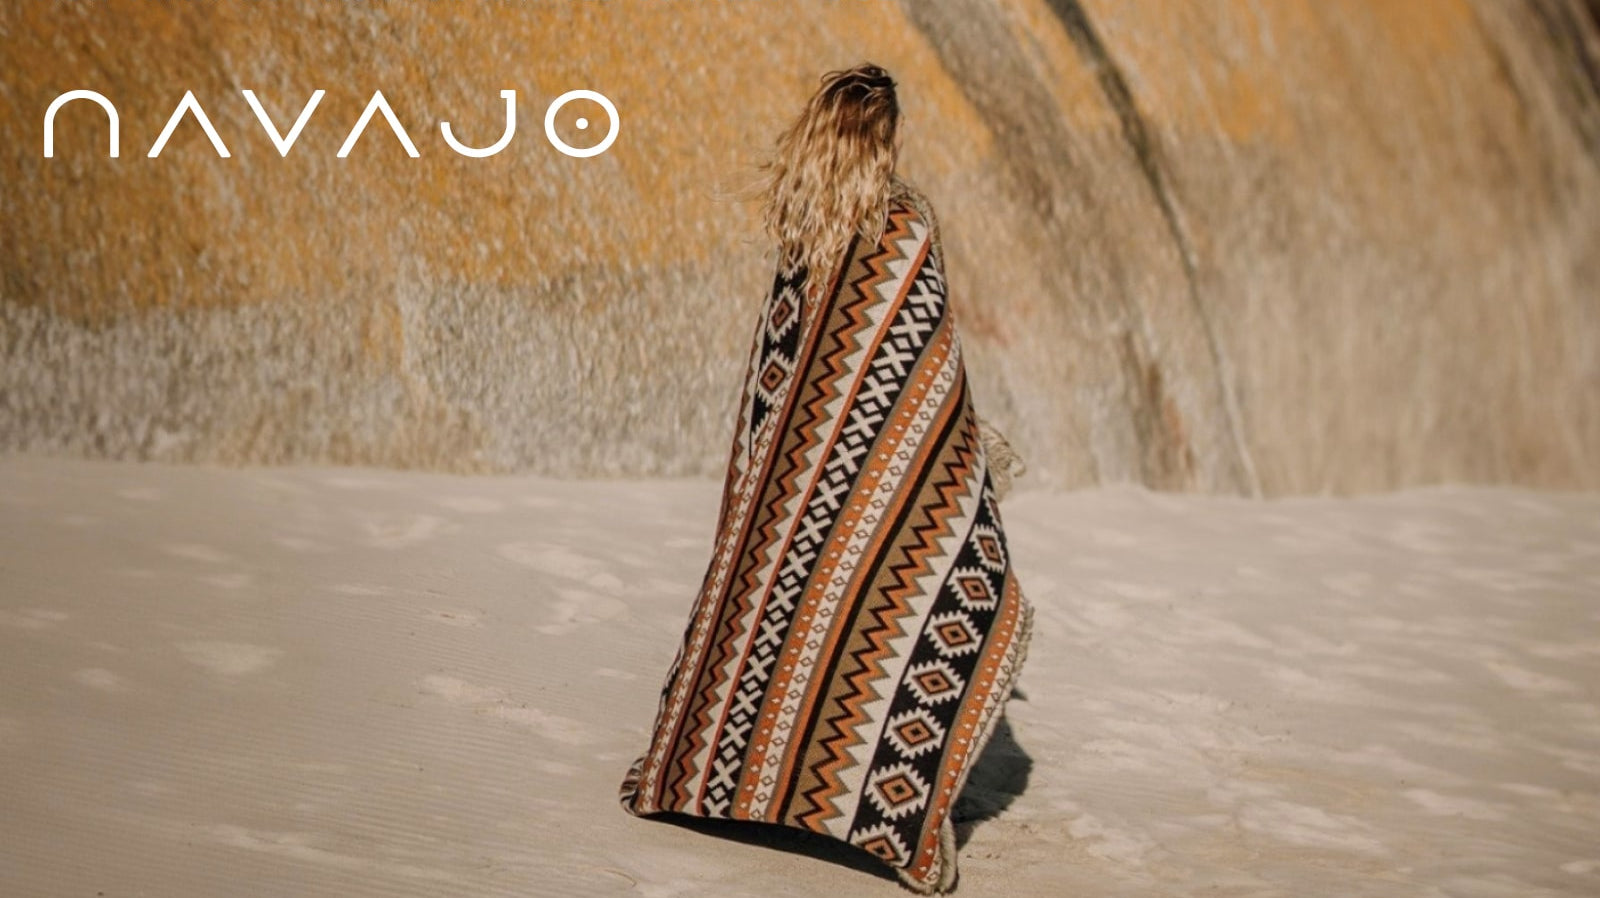 Discover the Majesty of the Dunes with the Navajo Faux Fur Knitted Blanket